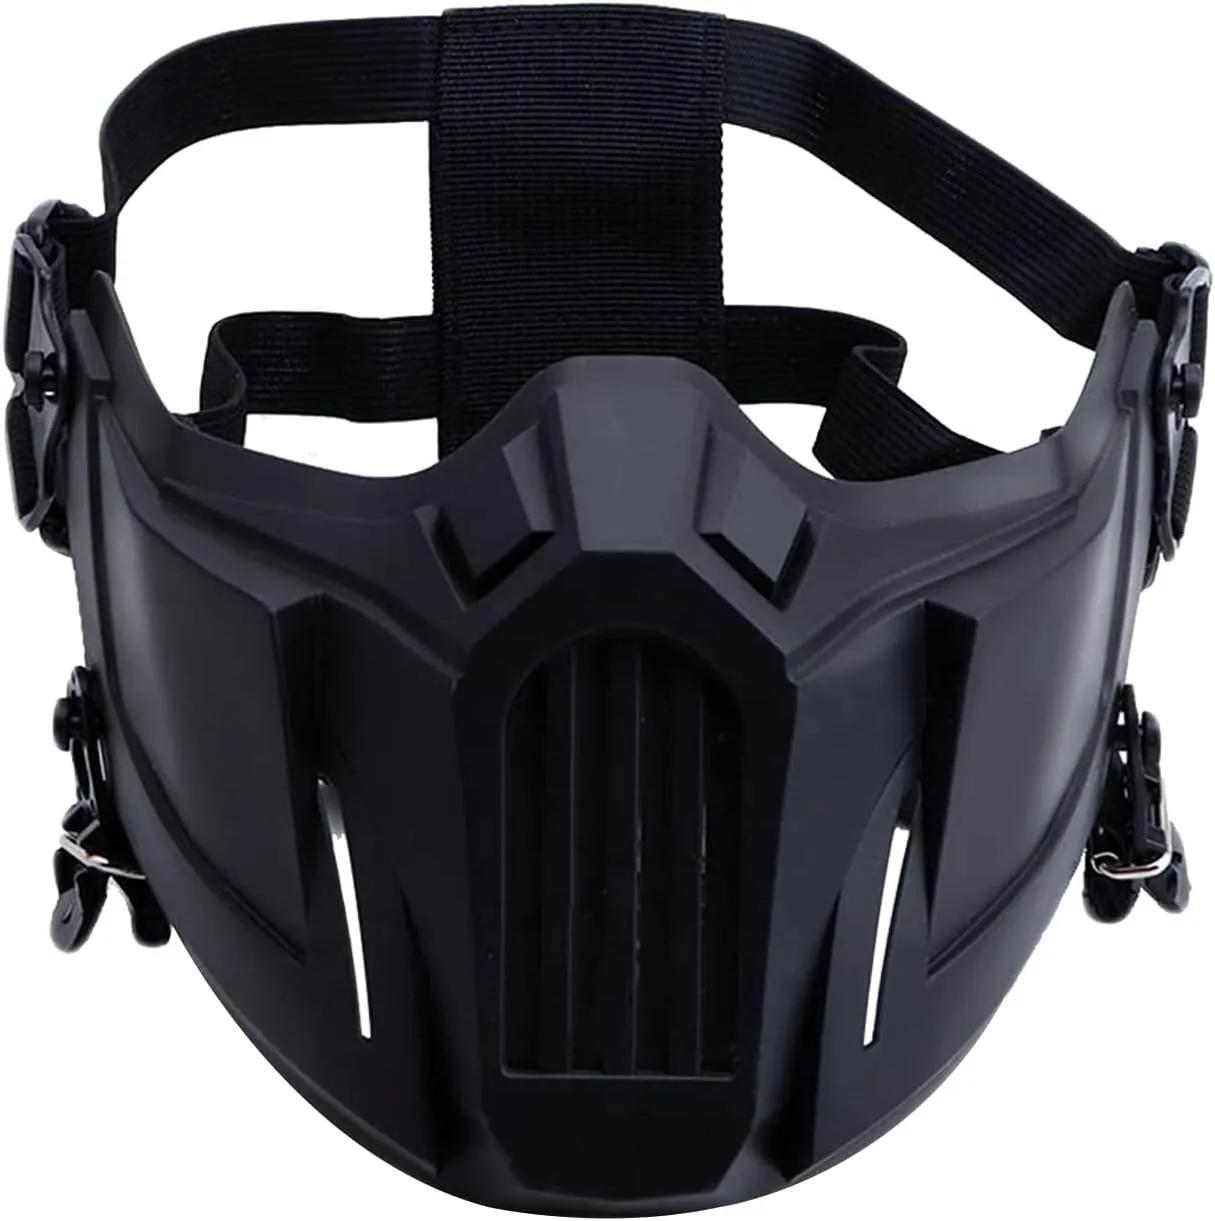 Creative Protective Half Face Mask Outdoor Game Mask Costume Mask Outdoor Sports Masks (Black)